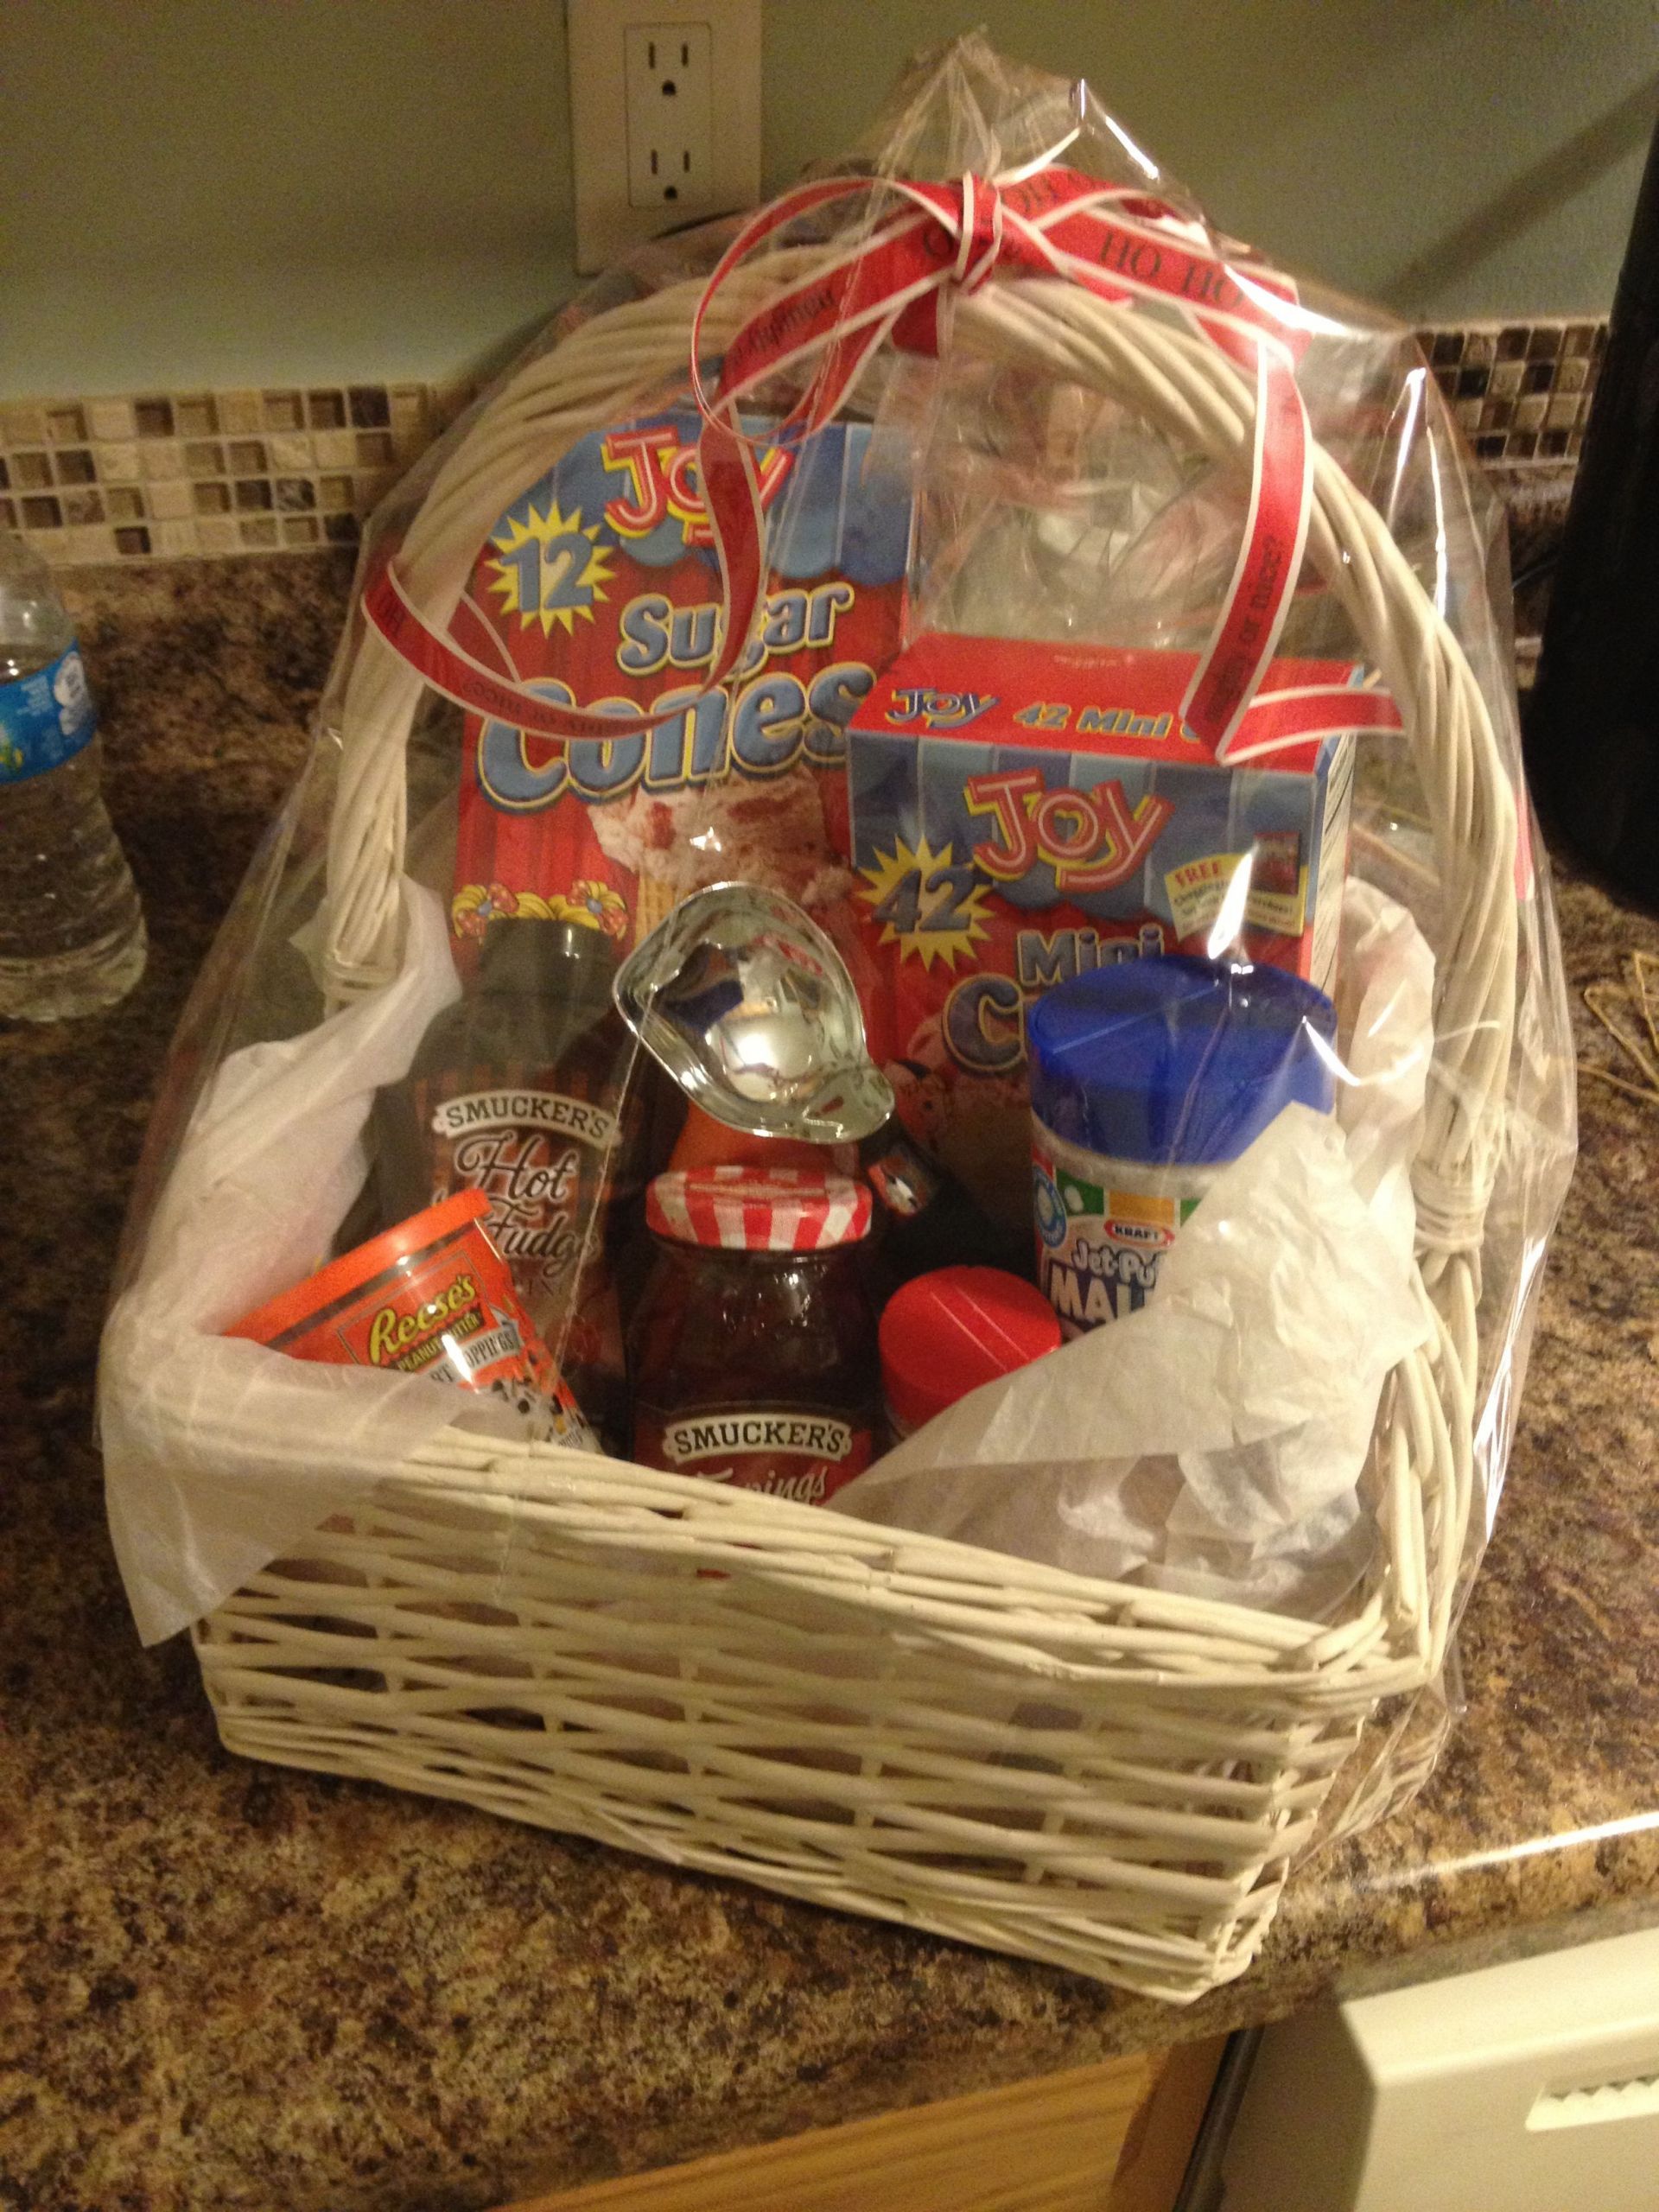 Ice Cream Gift Basket Ideas
 ice cream t basket toppings cones and a scoop